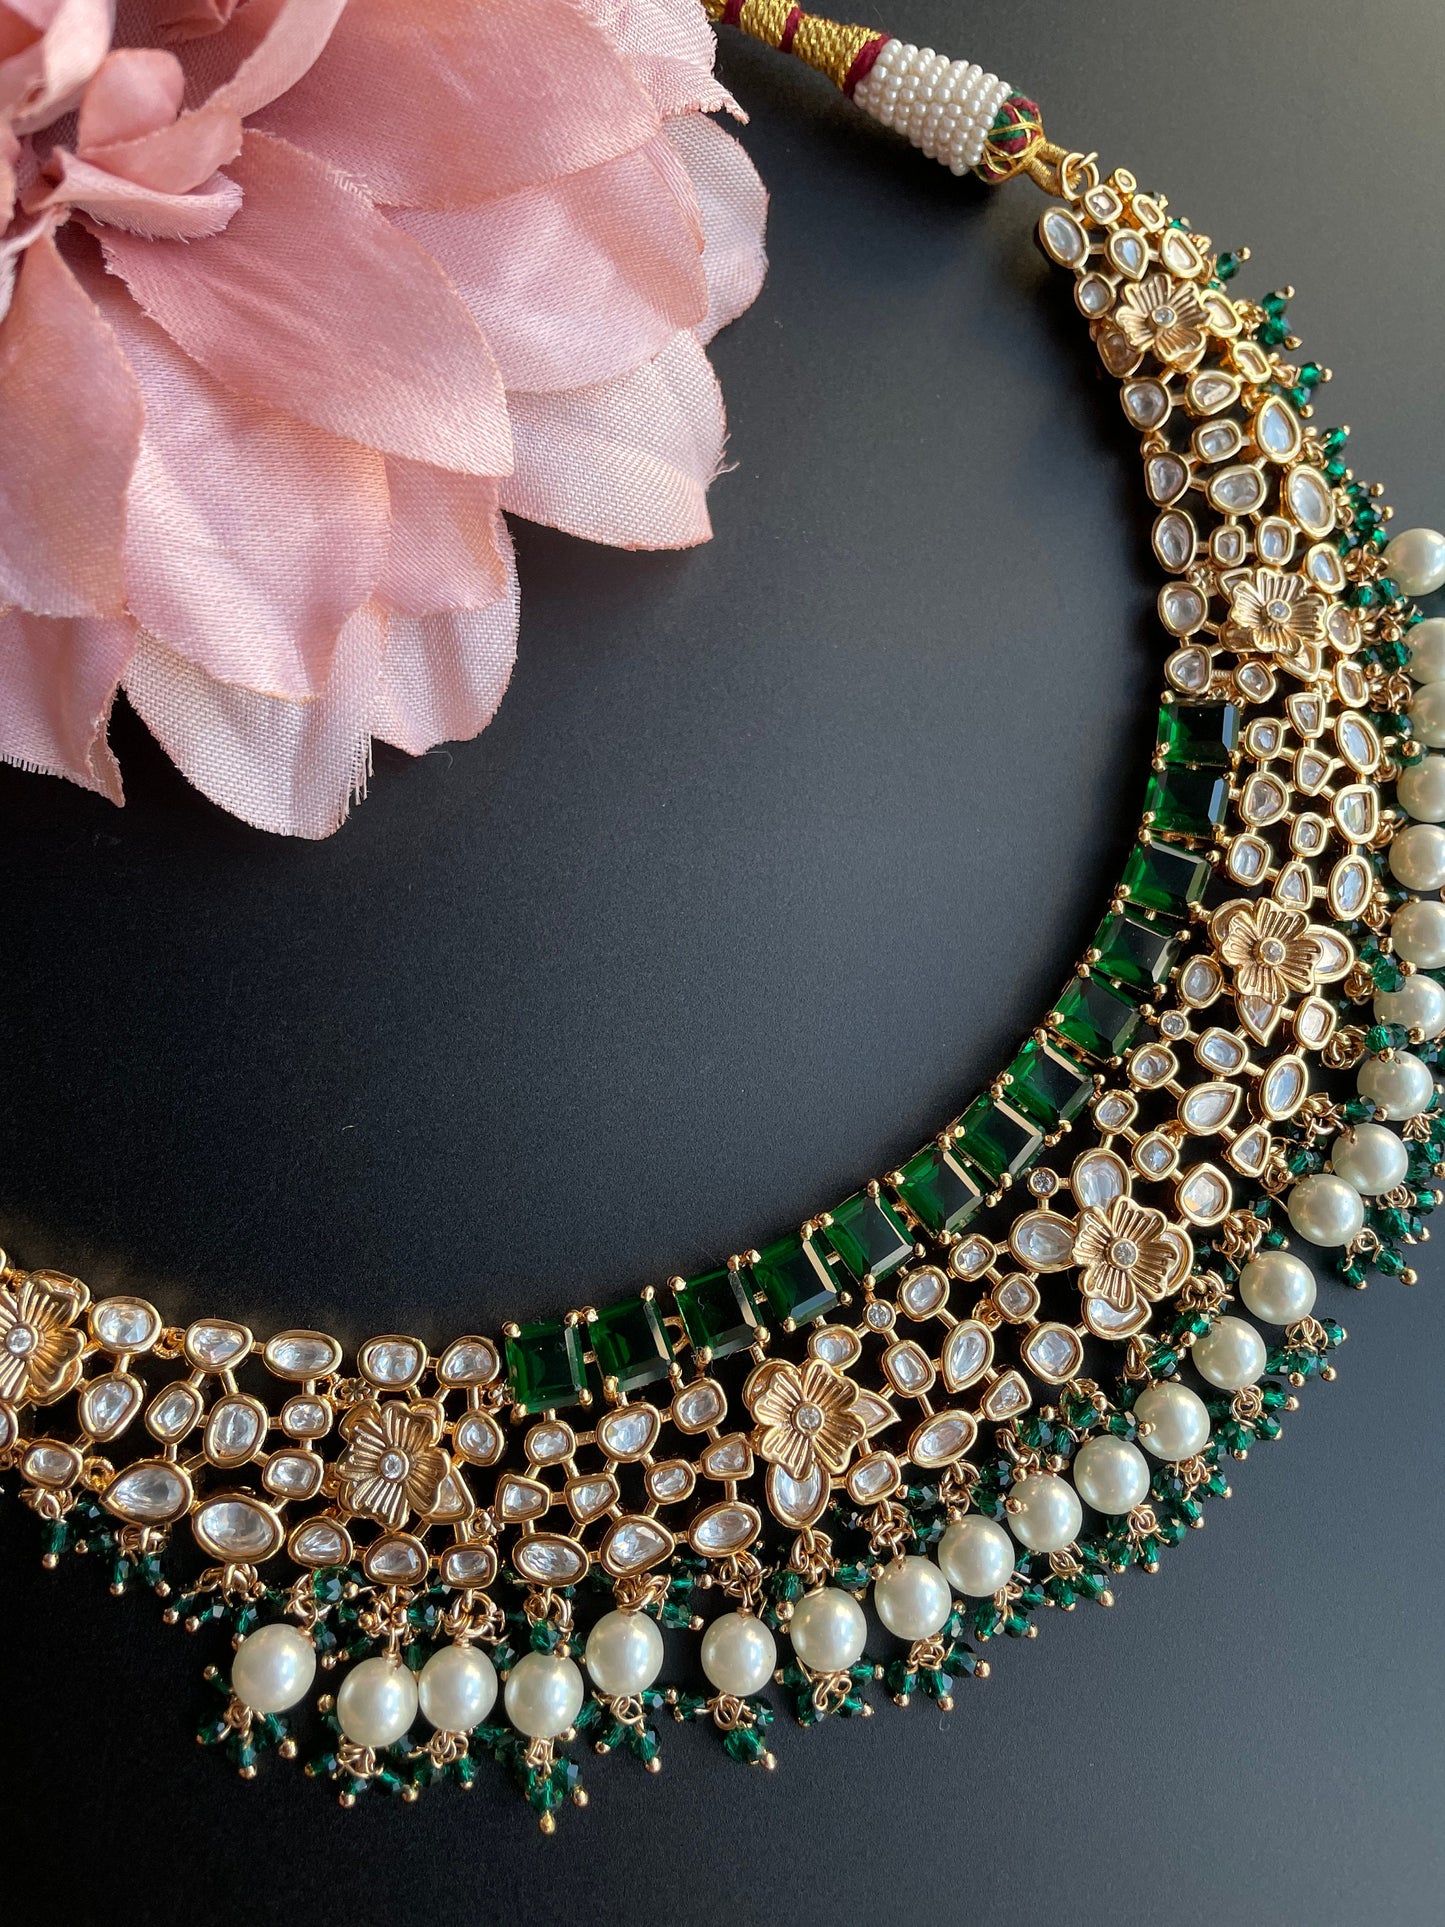 Rajasthani Jewelry/Meenakari Necklace/Indian Bollywood Jewelry/green indian choker/Mehendi Jewelry/Bright Unique Indian Necklace with jhumka